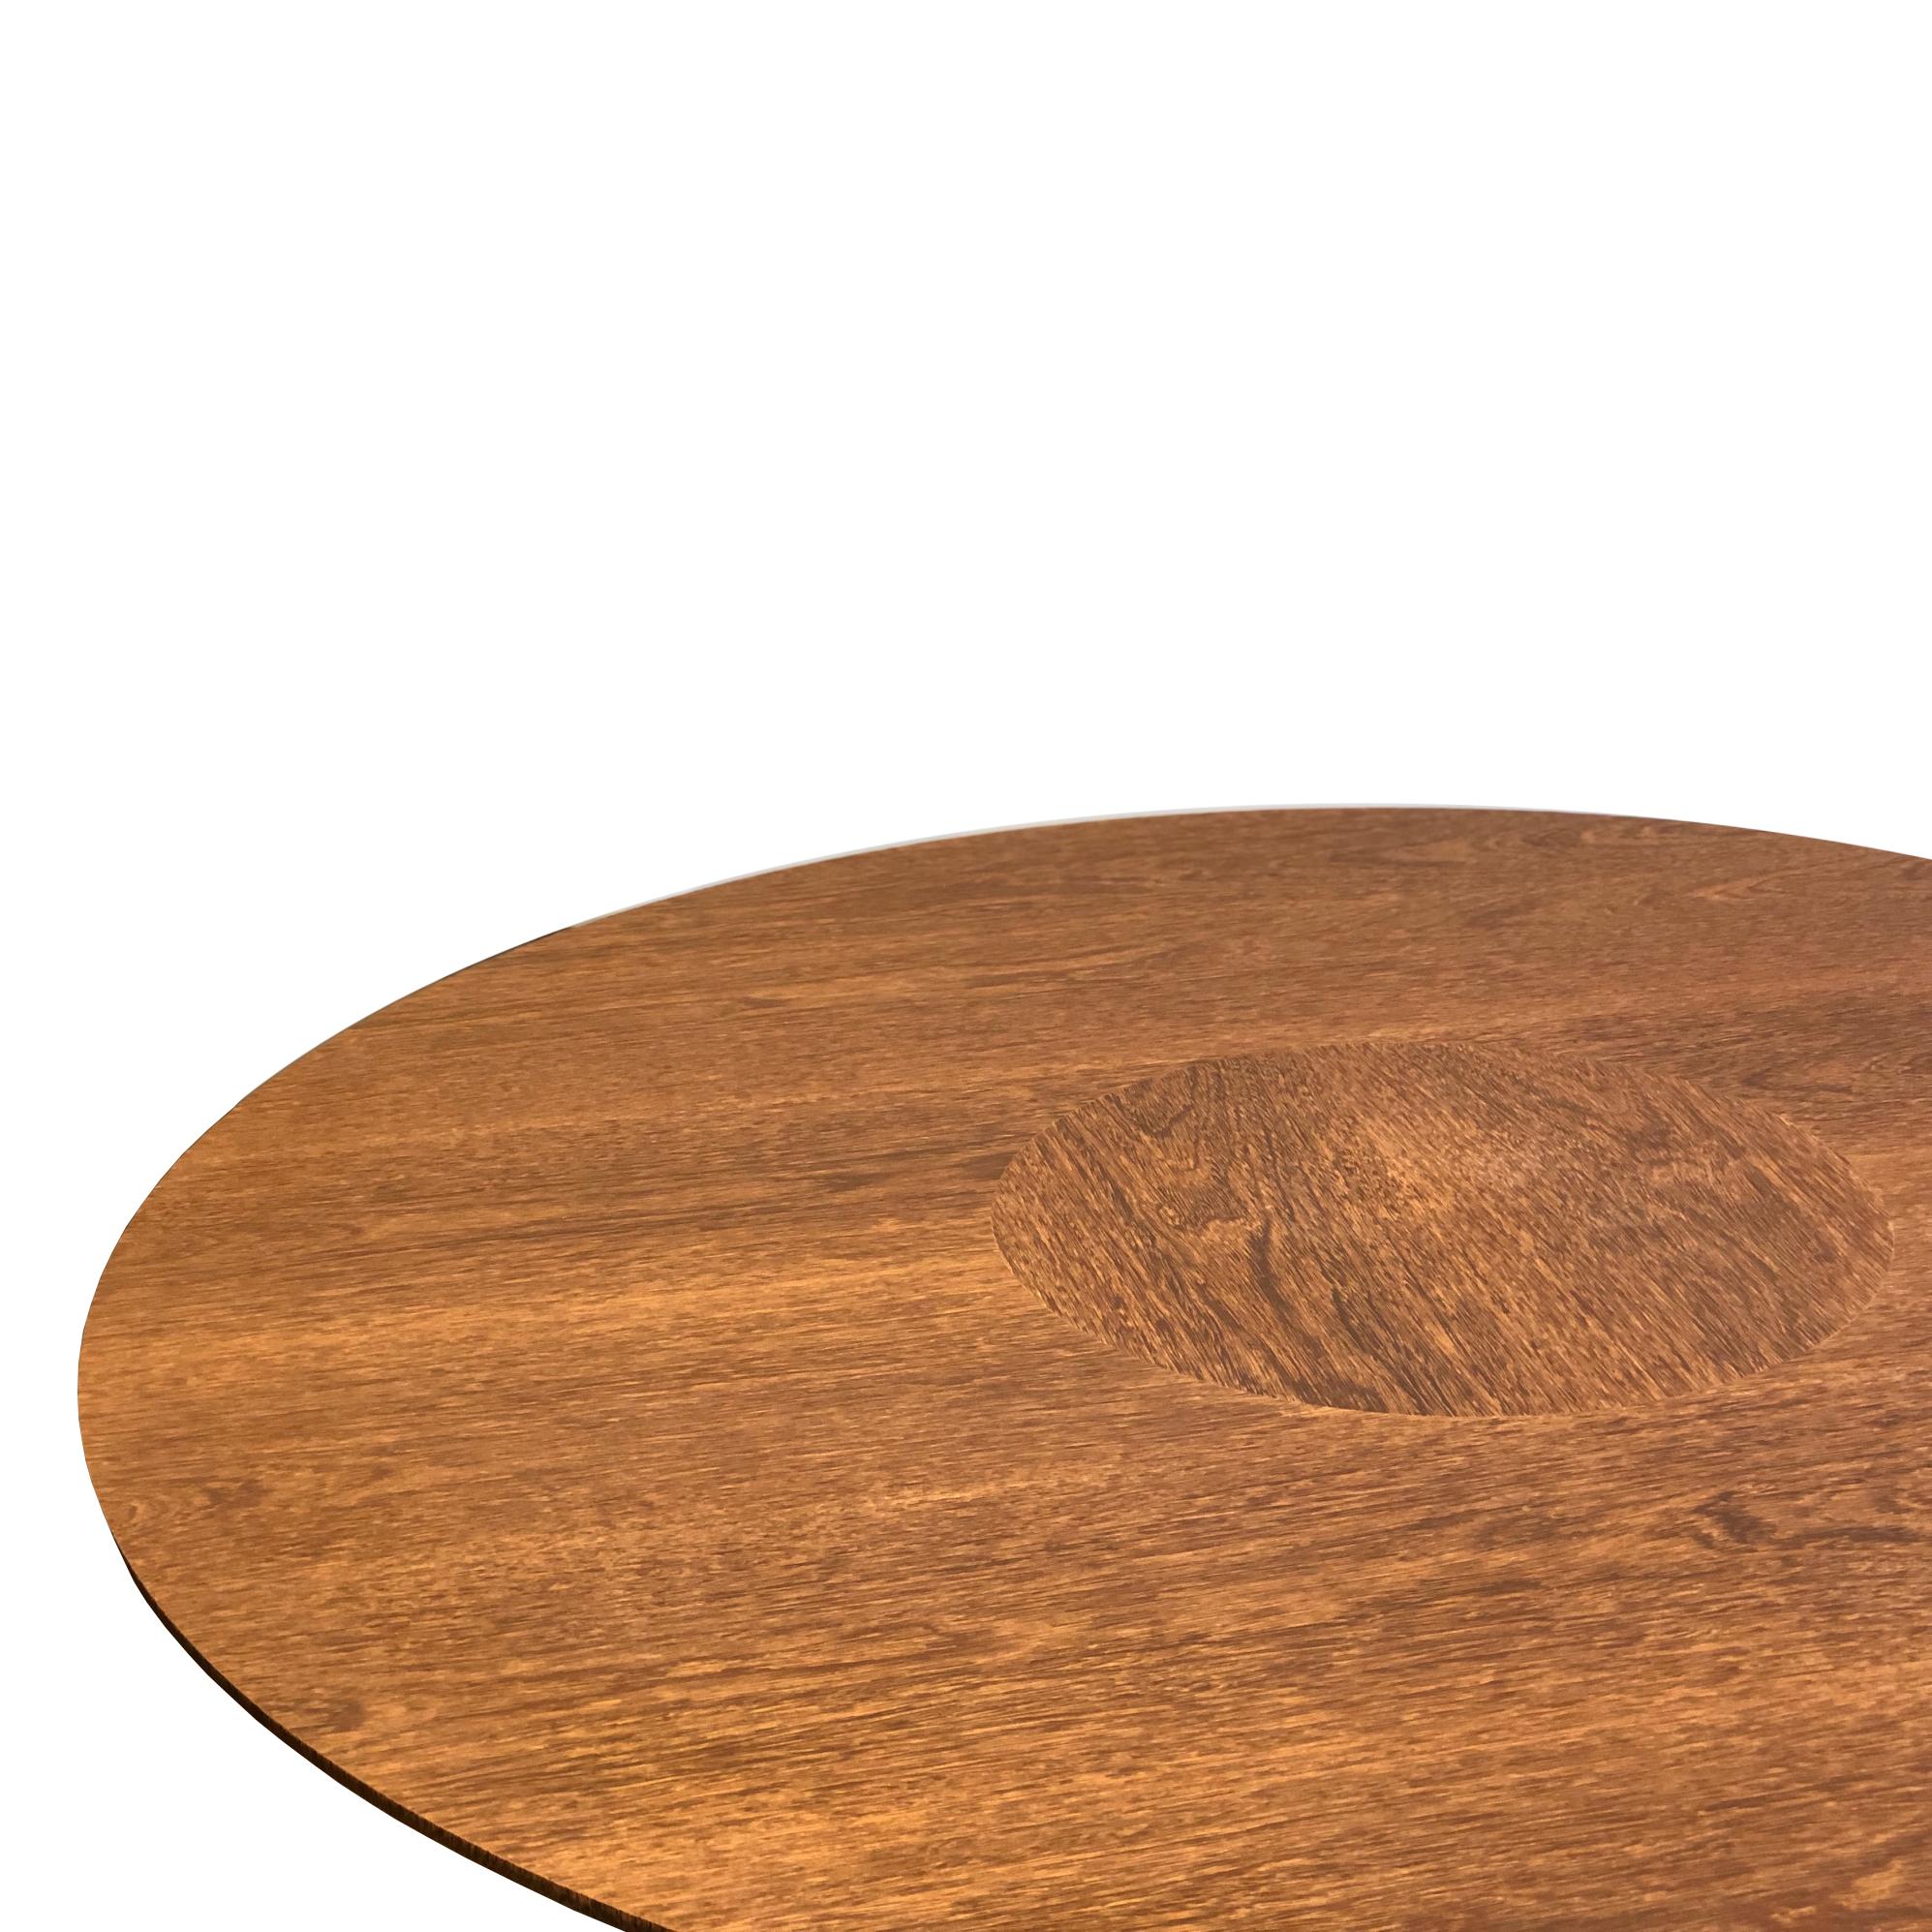 Anambé dining table is part of a very important project to develop poor amazonian communities in the art of manufacturing design furniture using correctly the FSC certified wood produced in this region. Alessandra has travelled to Tapajós Forest